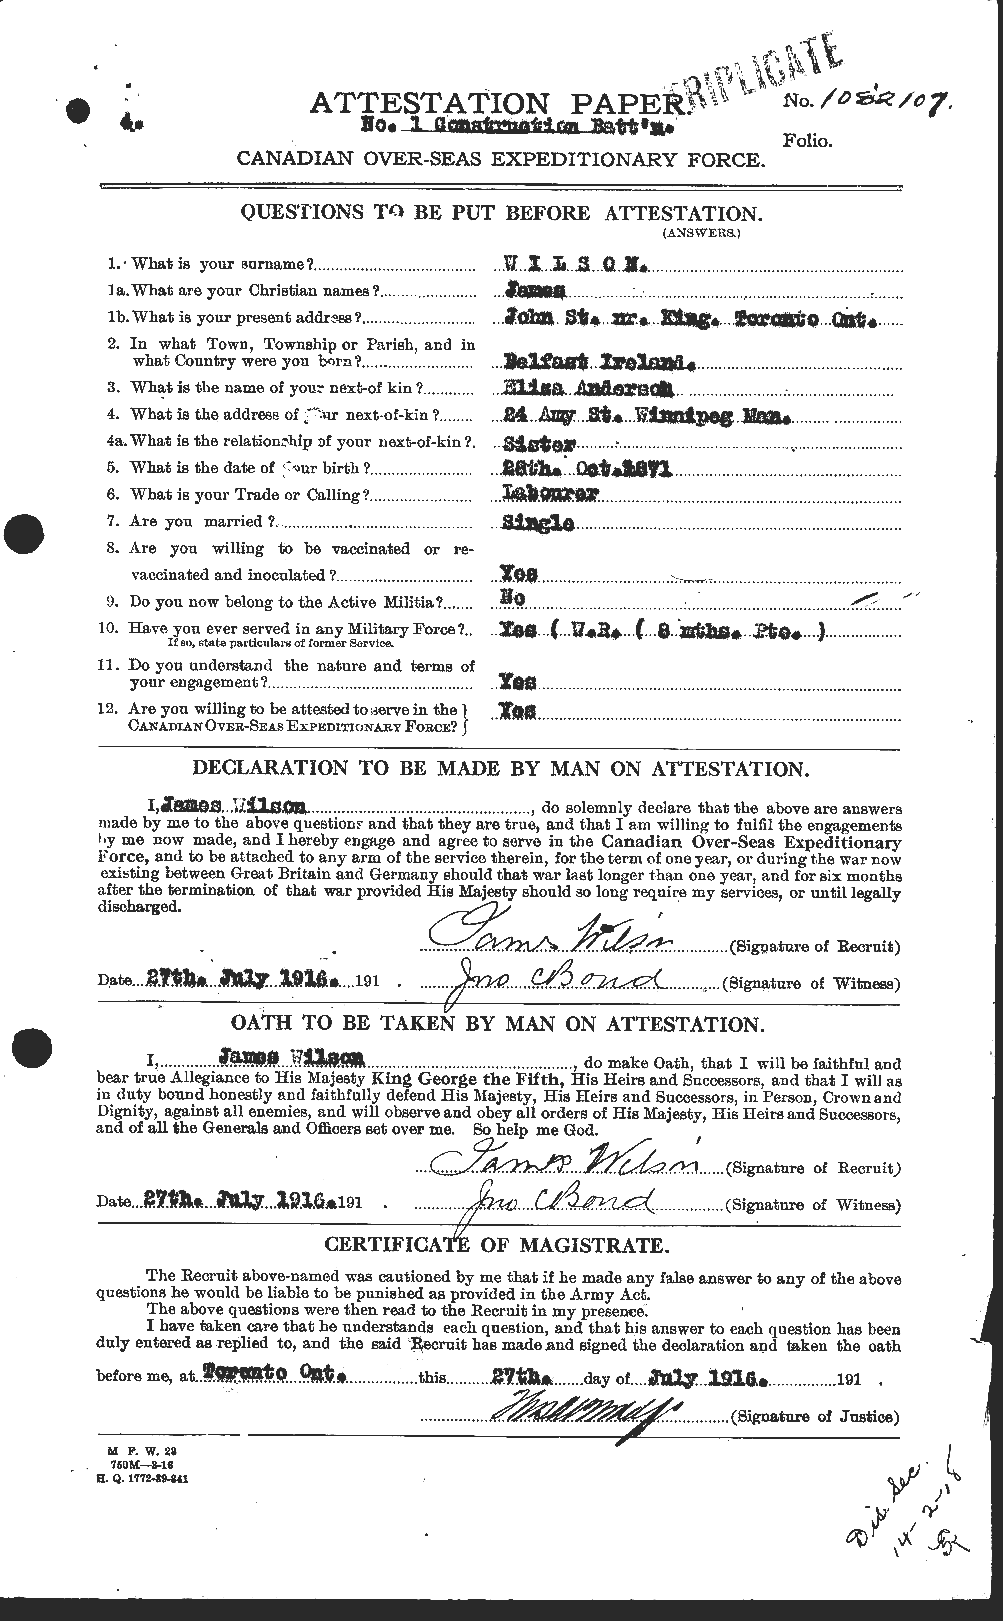 Personnel Records of the First World War - CEF 681326a